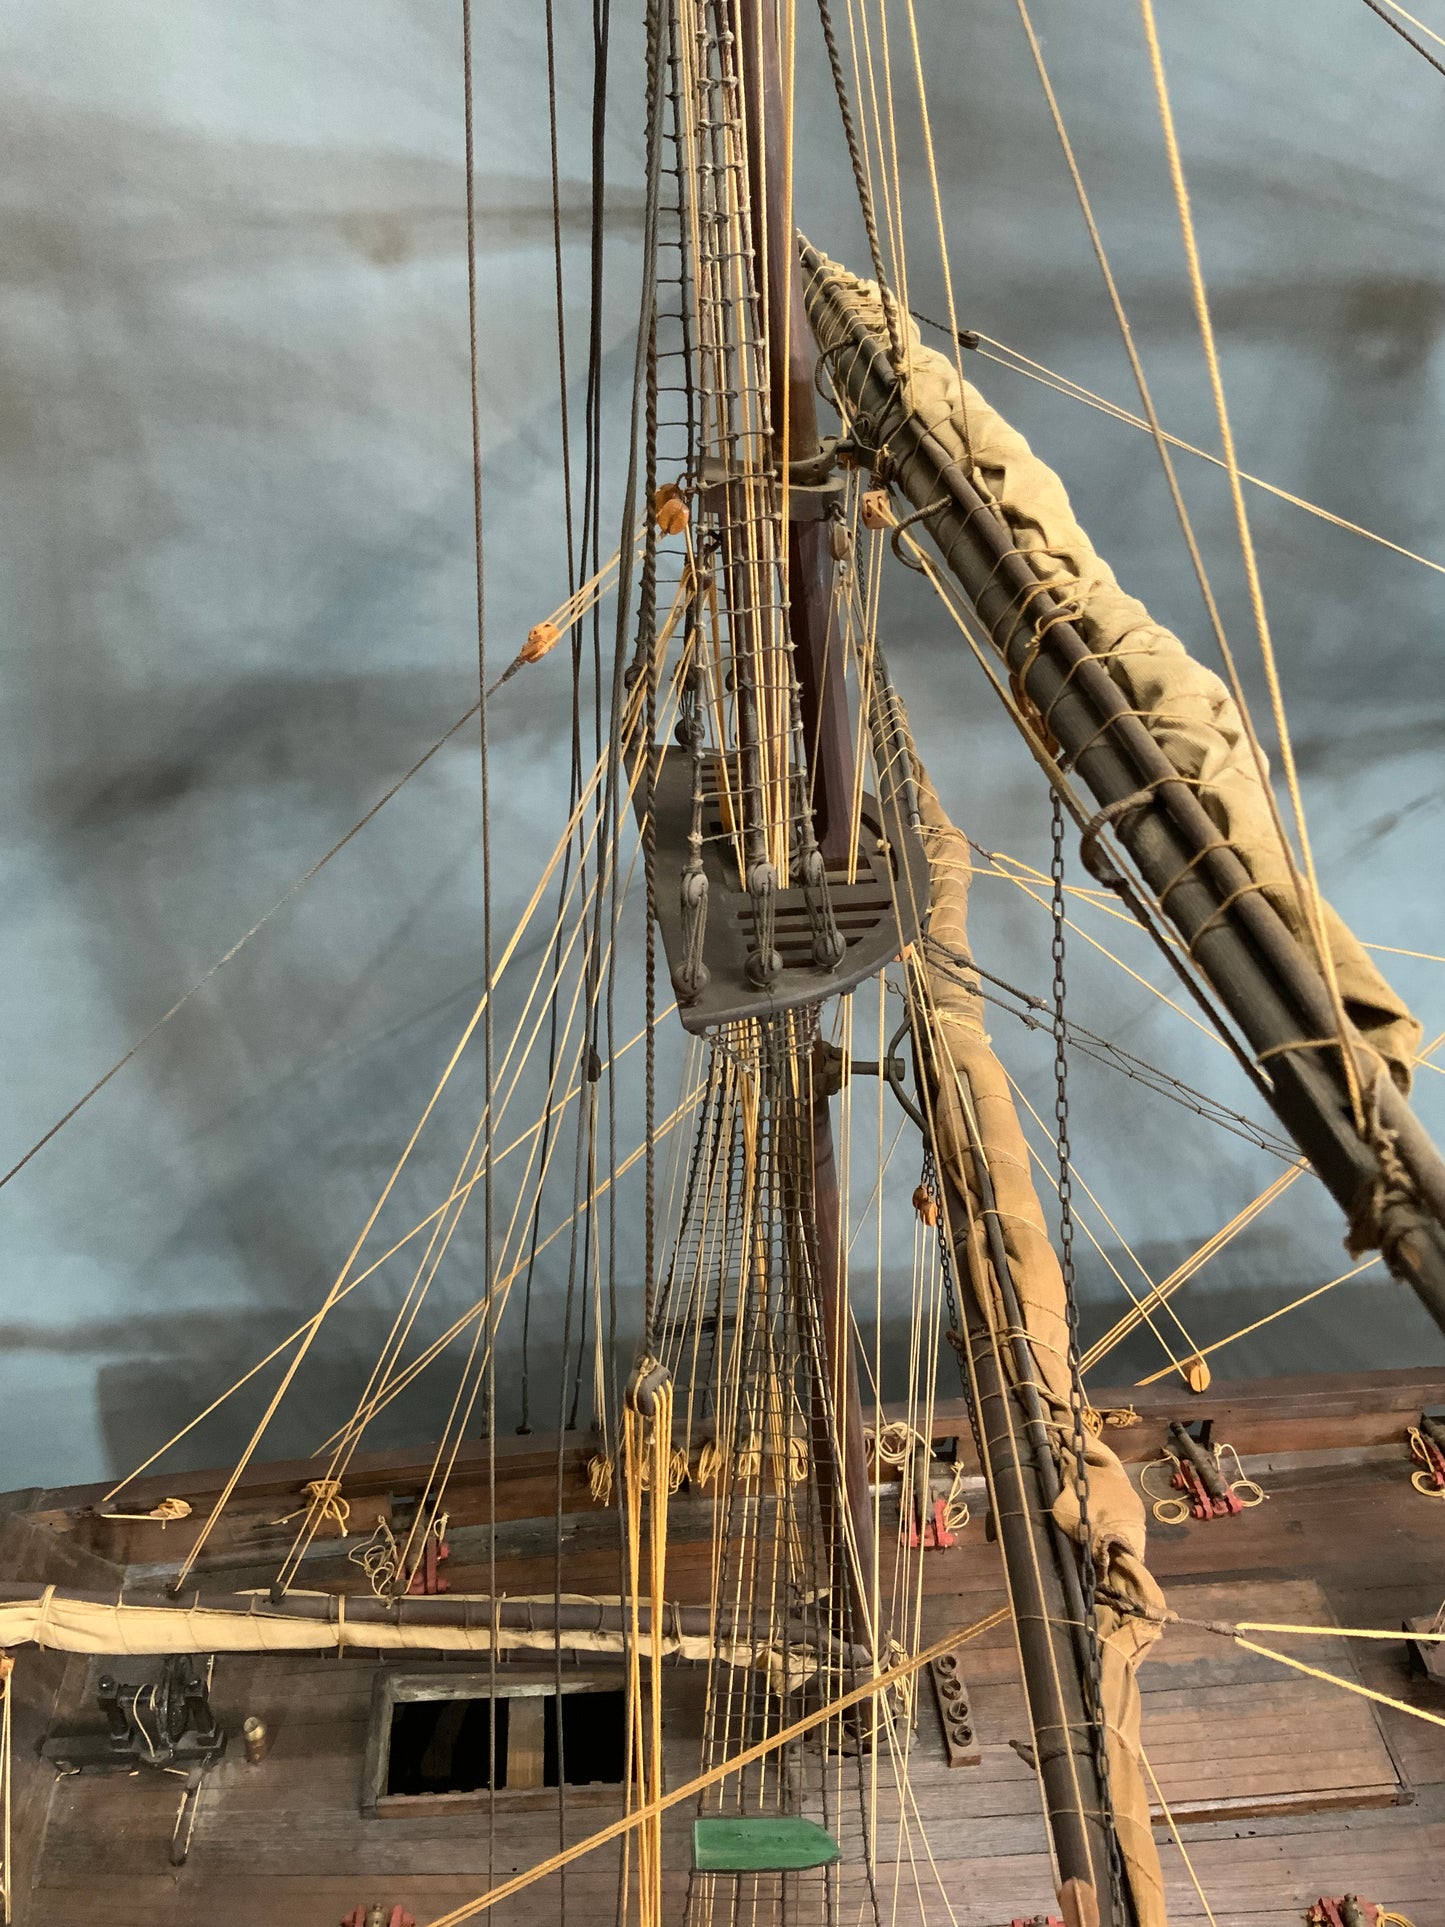 Historic Ship Model from the DeCoppet Collection - Lannan Gallery